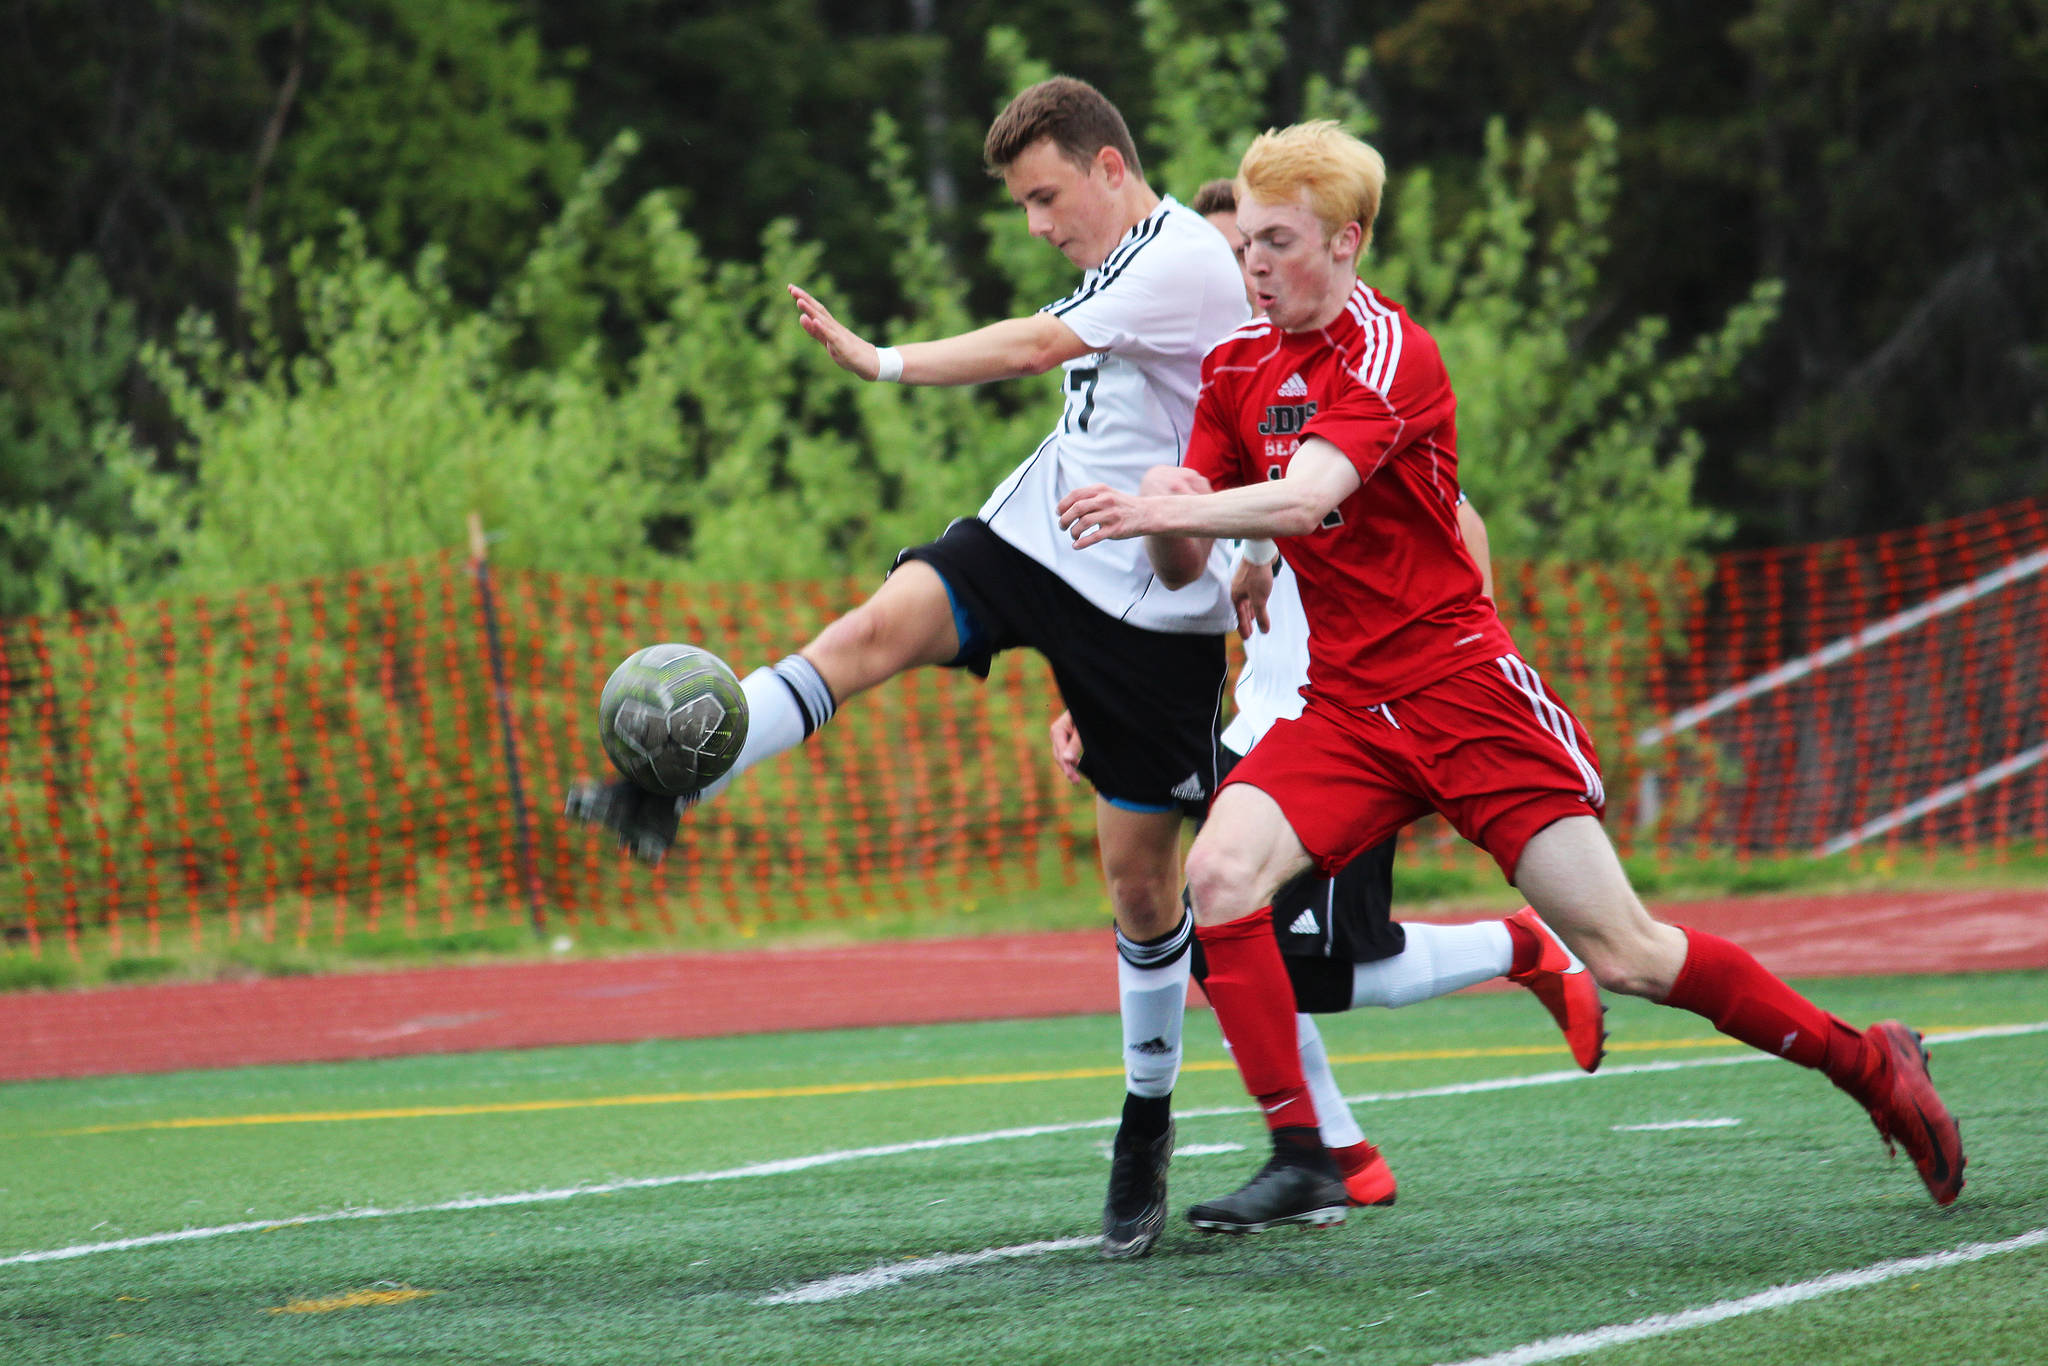 Kenai defender Travis Verkuilen clears the ball while under pressure from Juneau’s Kannon Goetz during the champioship match of the Division II state soccer tournament Saturday, May 25, 2019 at Service High School in Anchorage, Alaska. (Photo by Megan Pacer/Homer News)